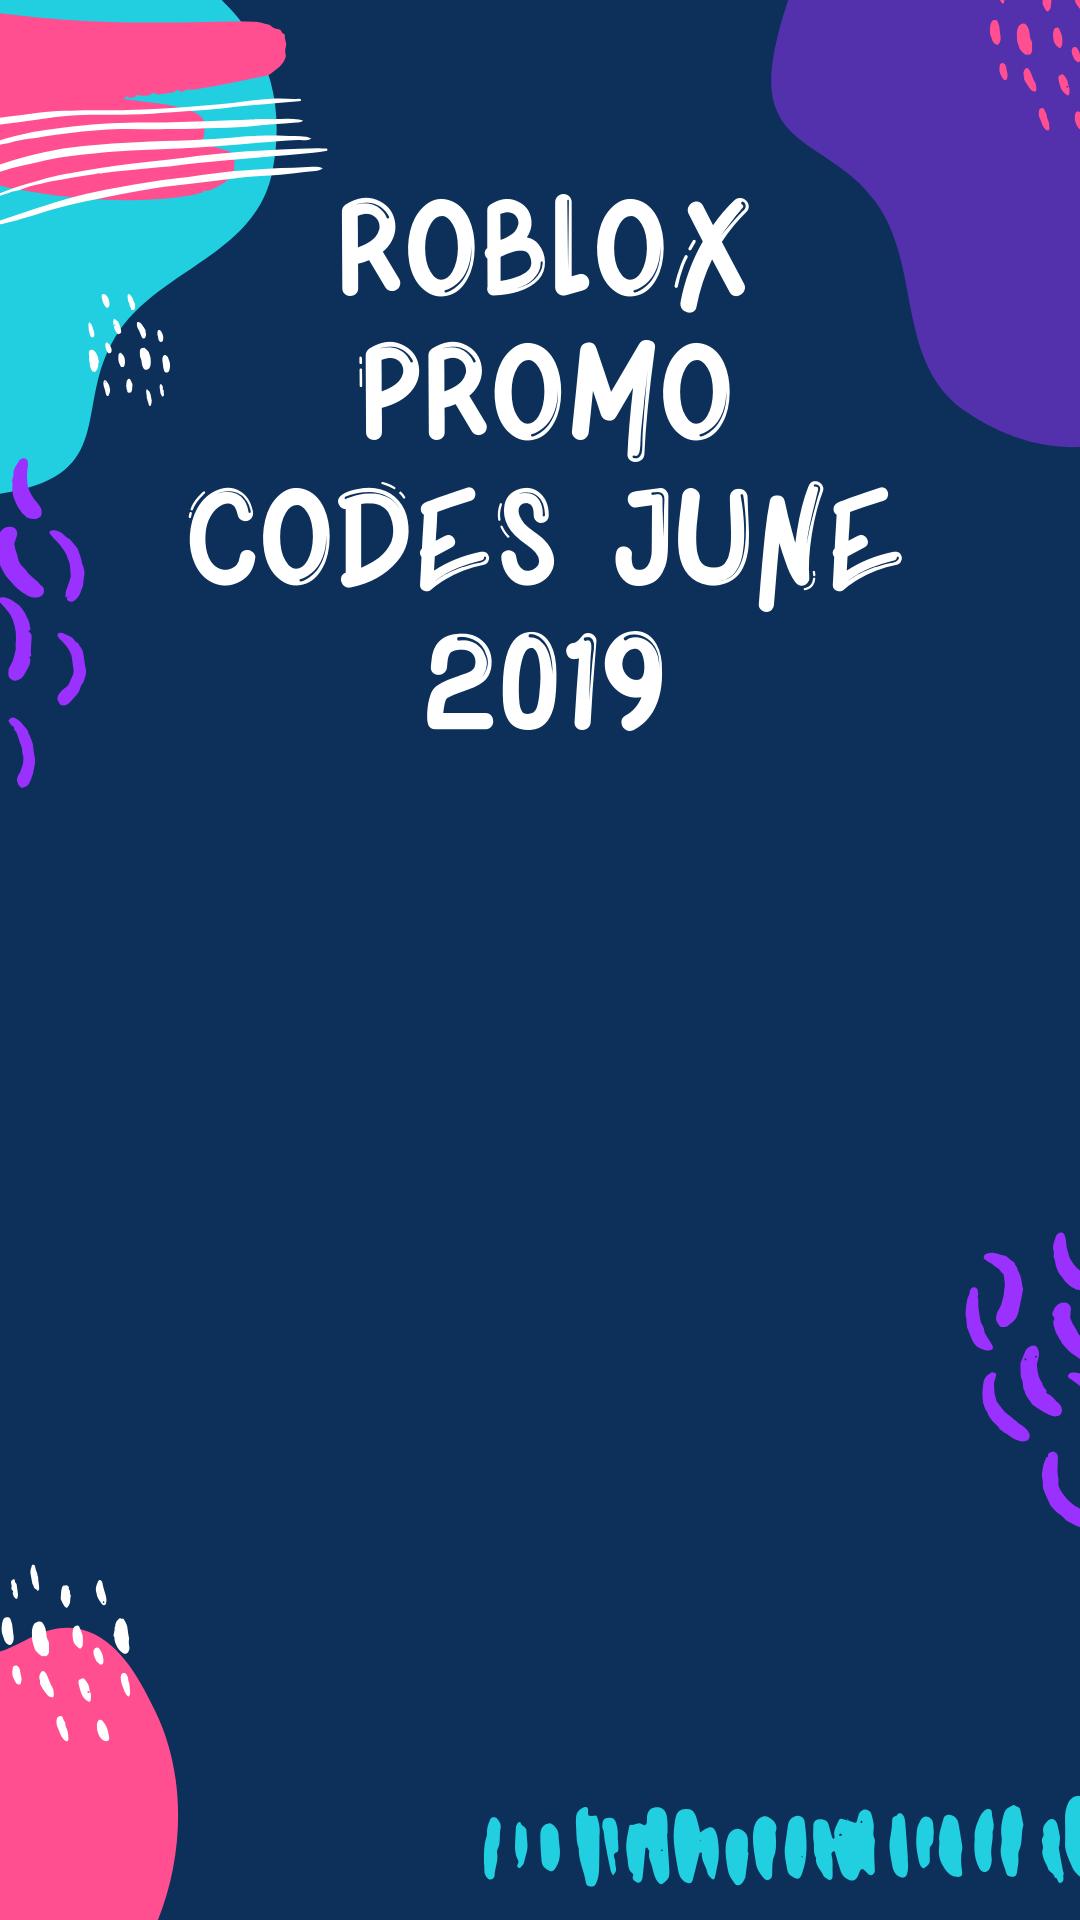 Roblox Promo Codes 2020 On Twitter Roblox Working Promo Code June 2019 Spider Cola Just Enter Promo Code Spidercola Click Here To Get All New Roblox Promo Codes Today S Link Https T Co Co1ltinps5 Robloxnew - roblox codes june